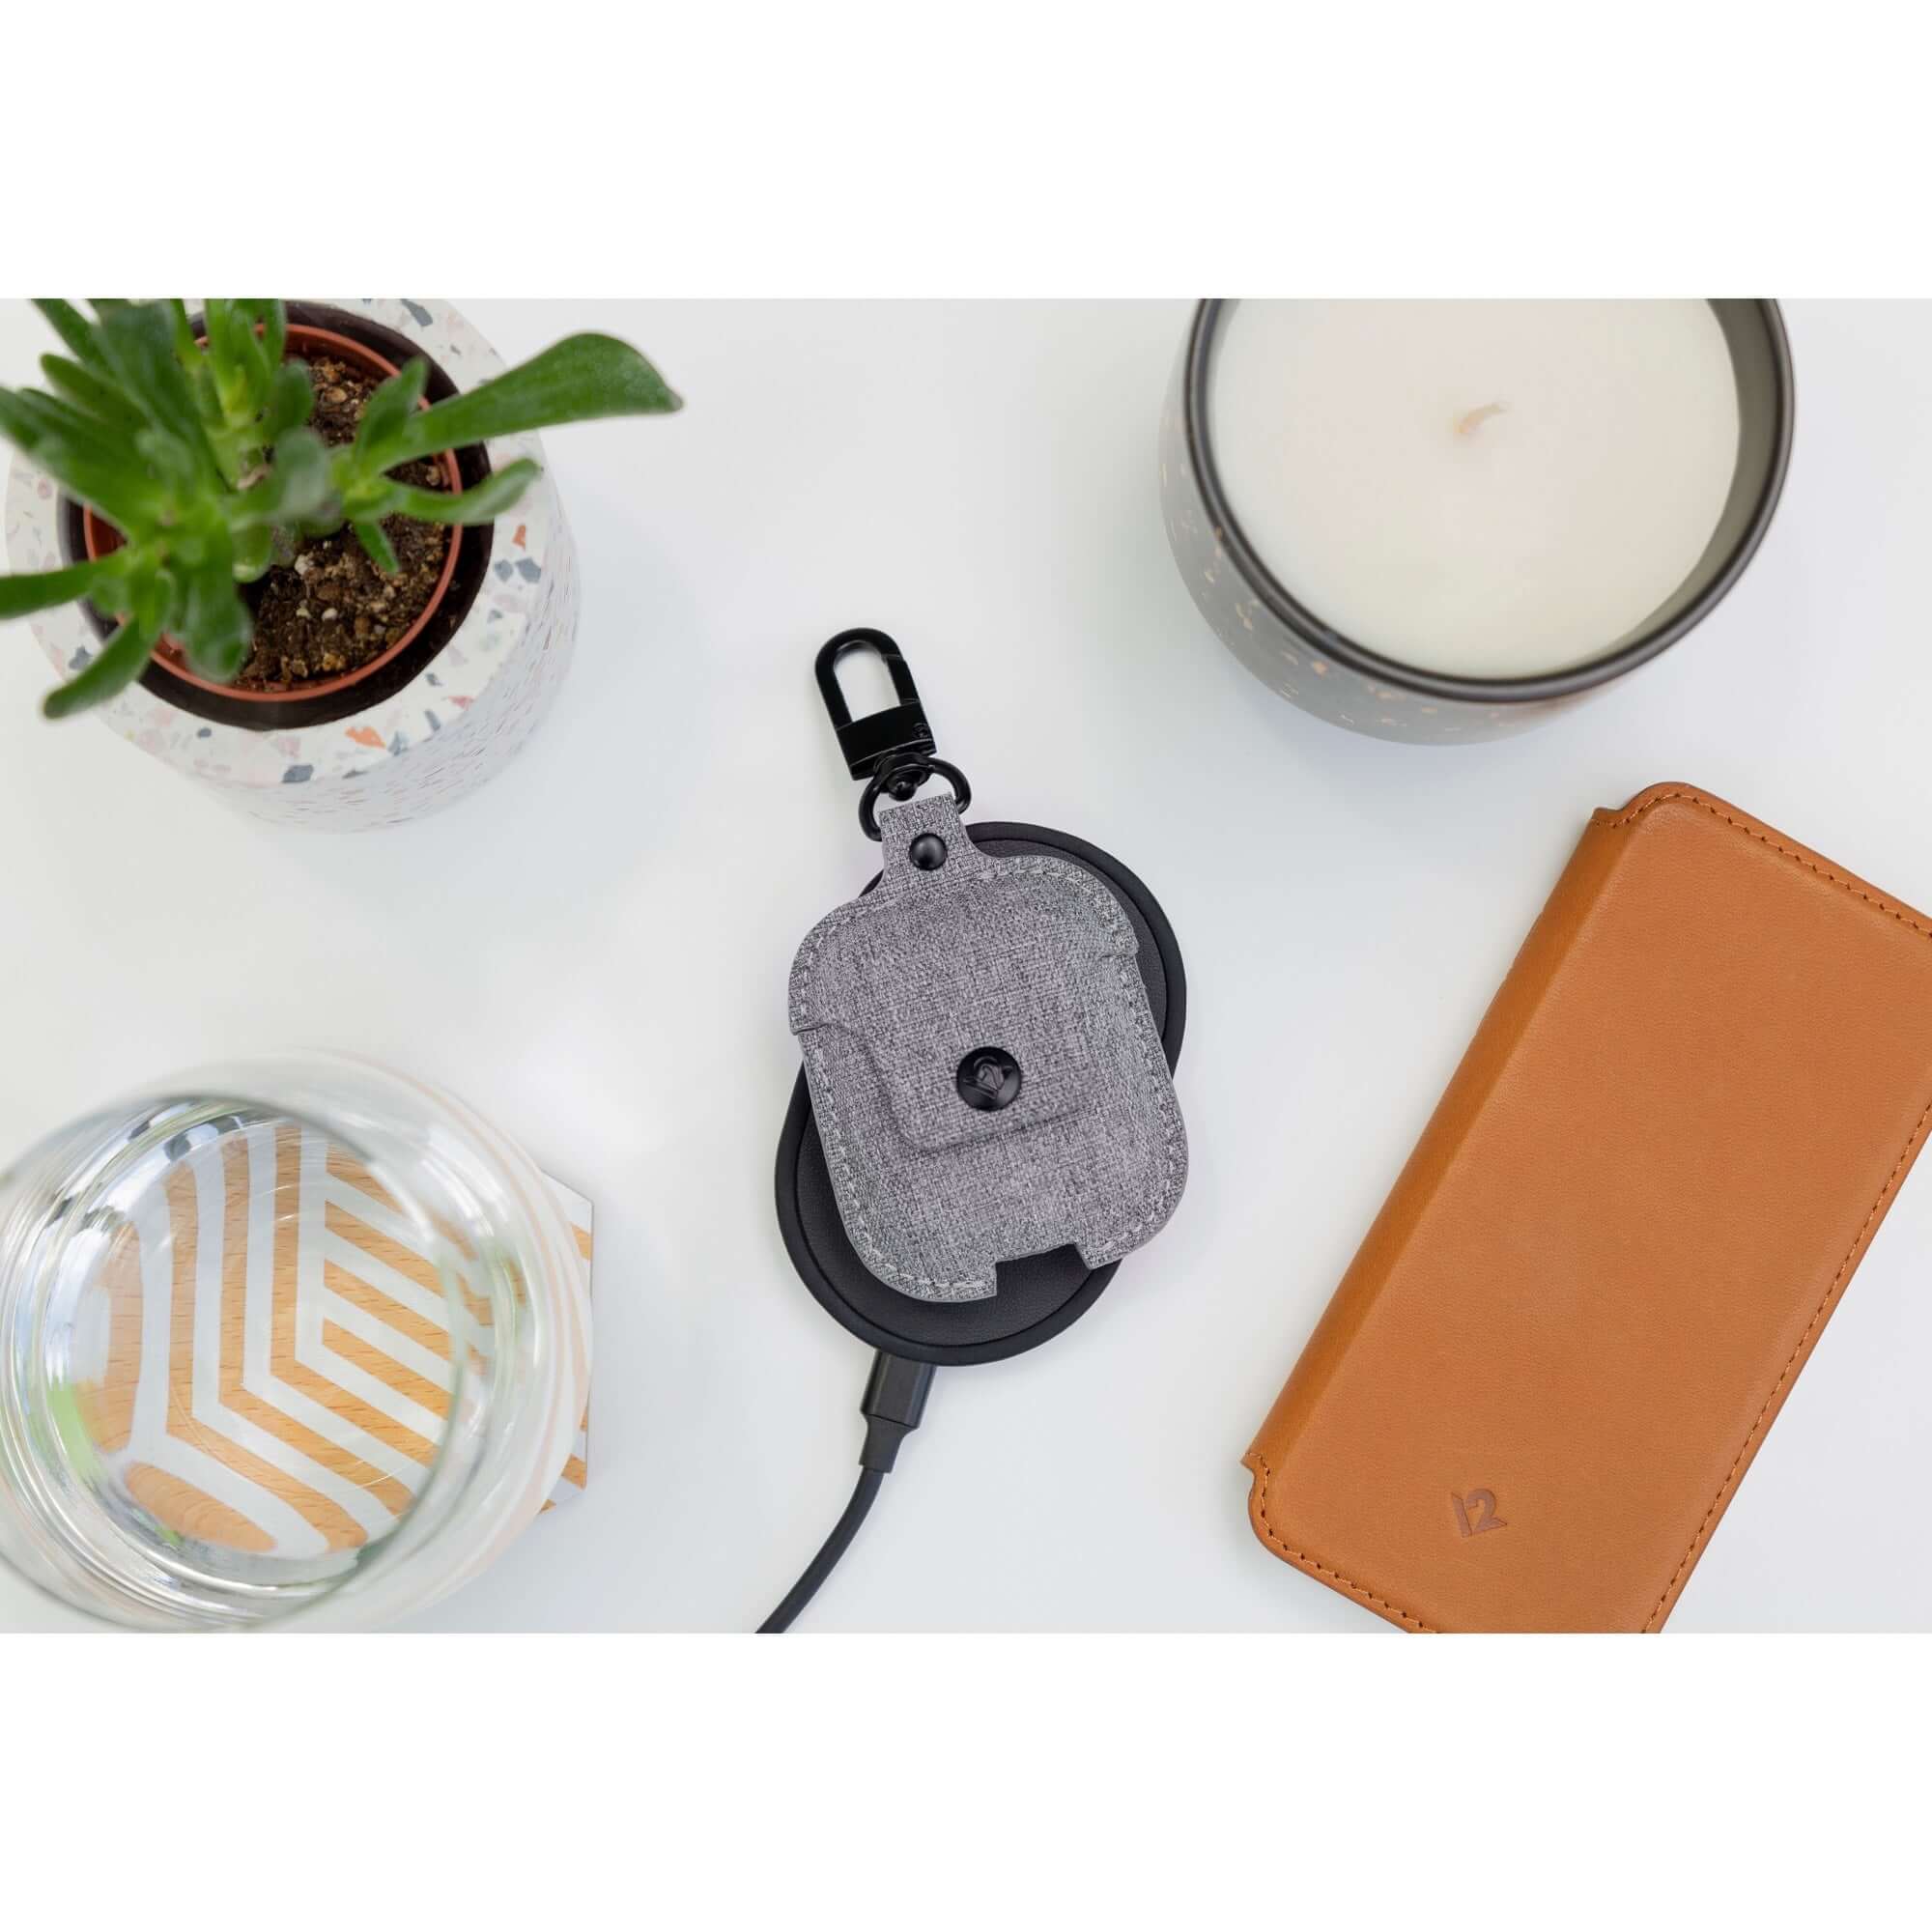 BEON.COM.AU Carry (and protect) your AirPods in style. Slip your AirPods Charging Case into AirSnap to keep your pricey ear buds safe and sound but still easily accessible. Hook the built-in swivel clip to your backpack or bag and you'll never have to search for where you left your AirPods again! When yo... Twelve South at BEON.COM.AU